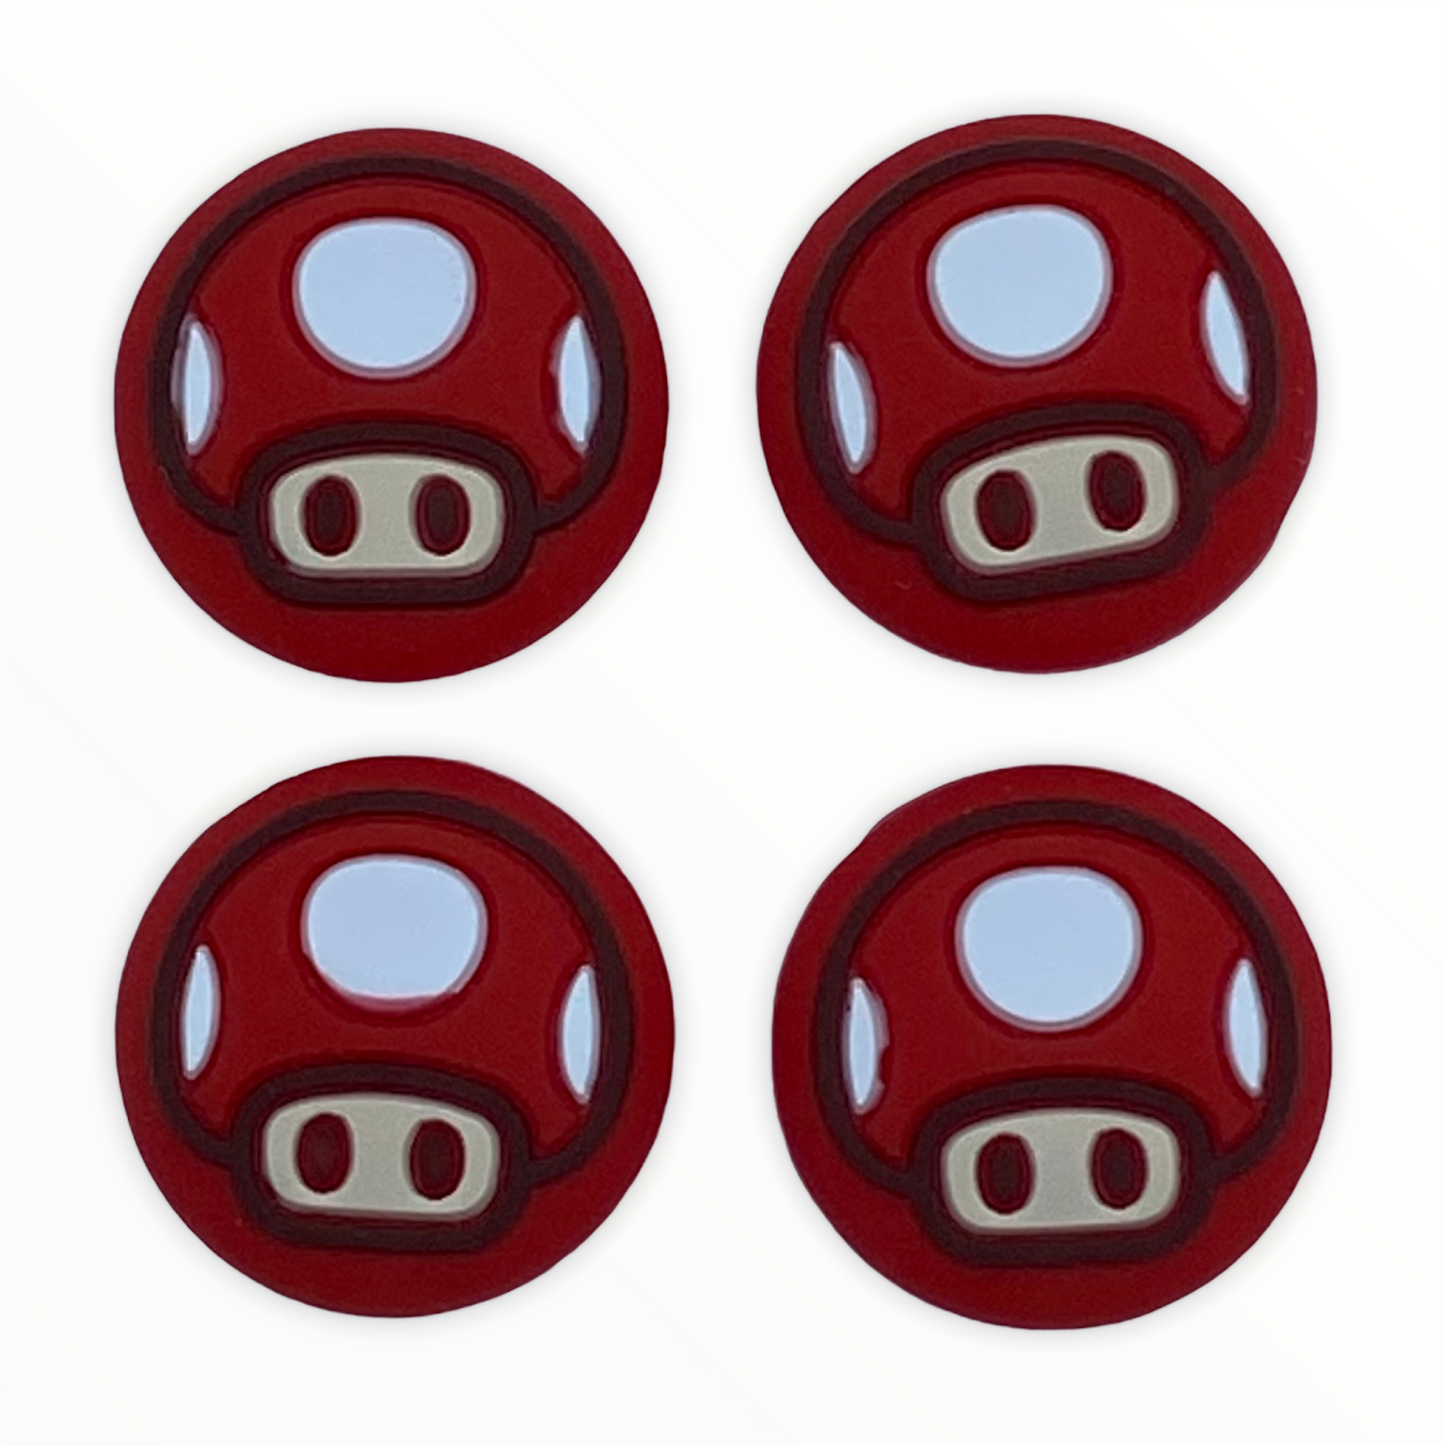 JenDore Red 4Pcs Mushroom Silicone Thumb Grip Caps for Nintendo Switch